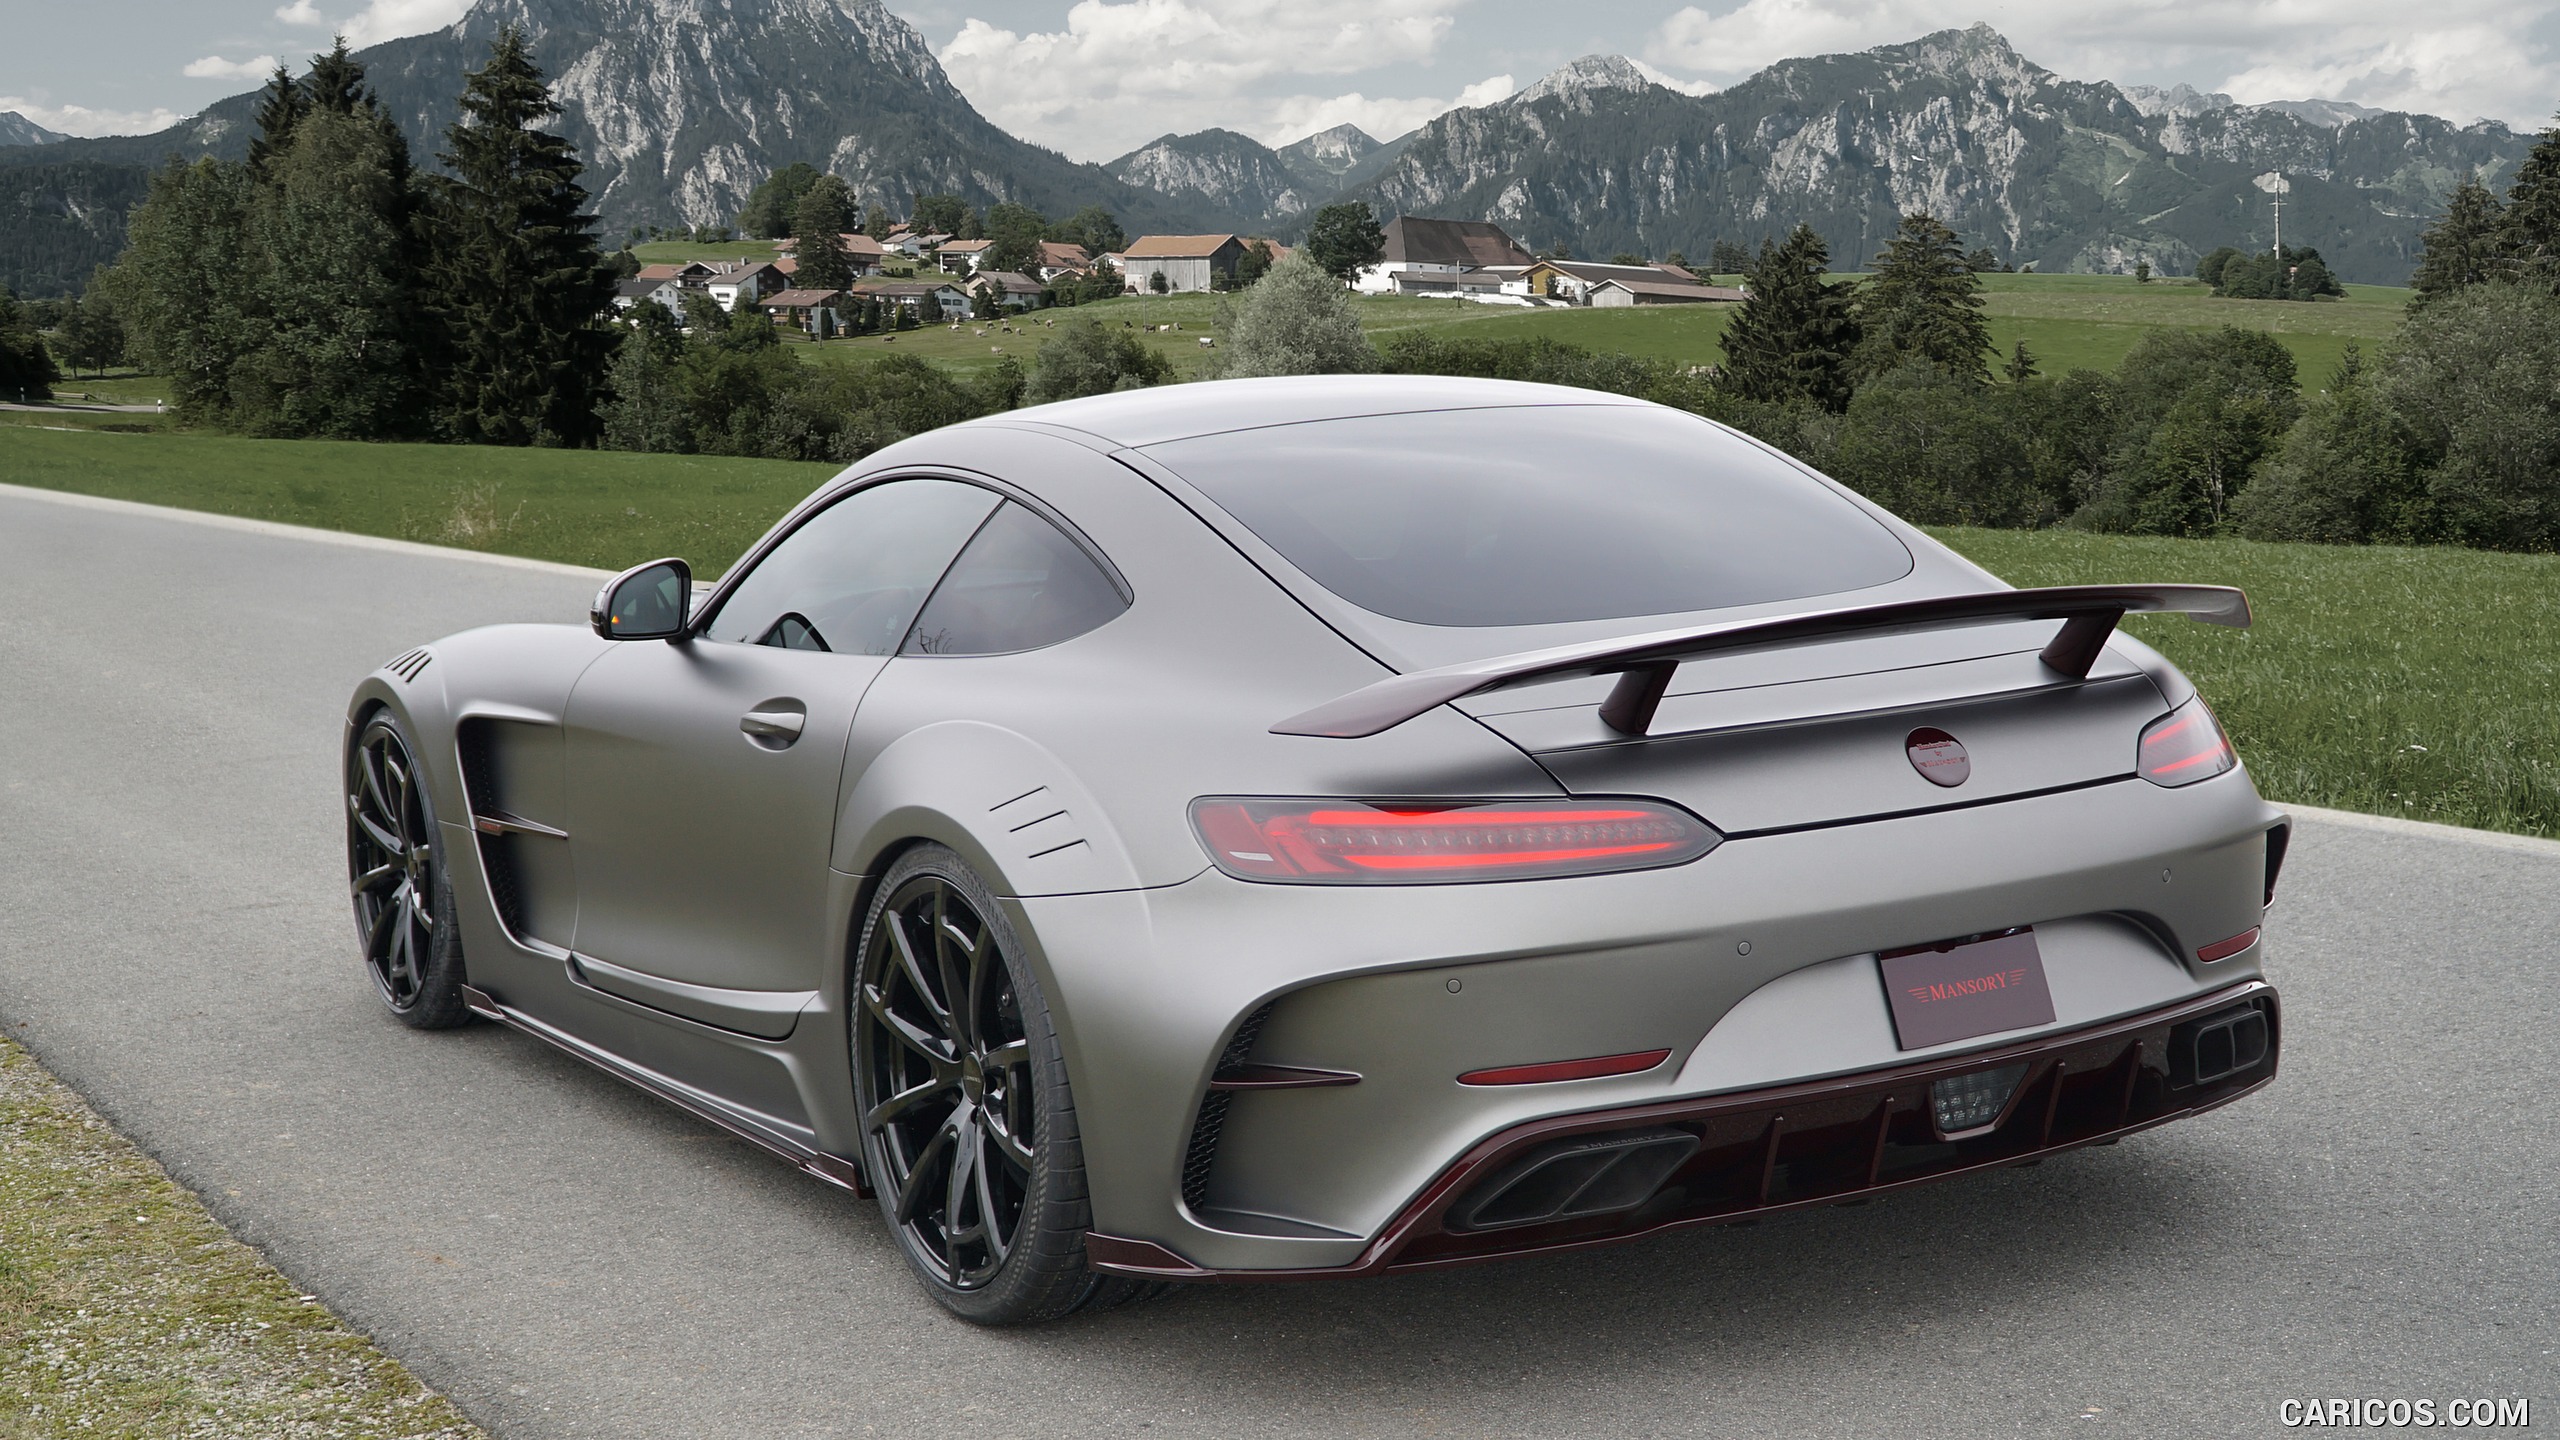 2016 MANSORY Mercedes-AMG GT S - Rear, #4 of 10